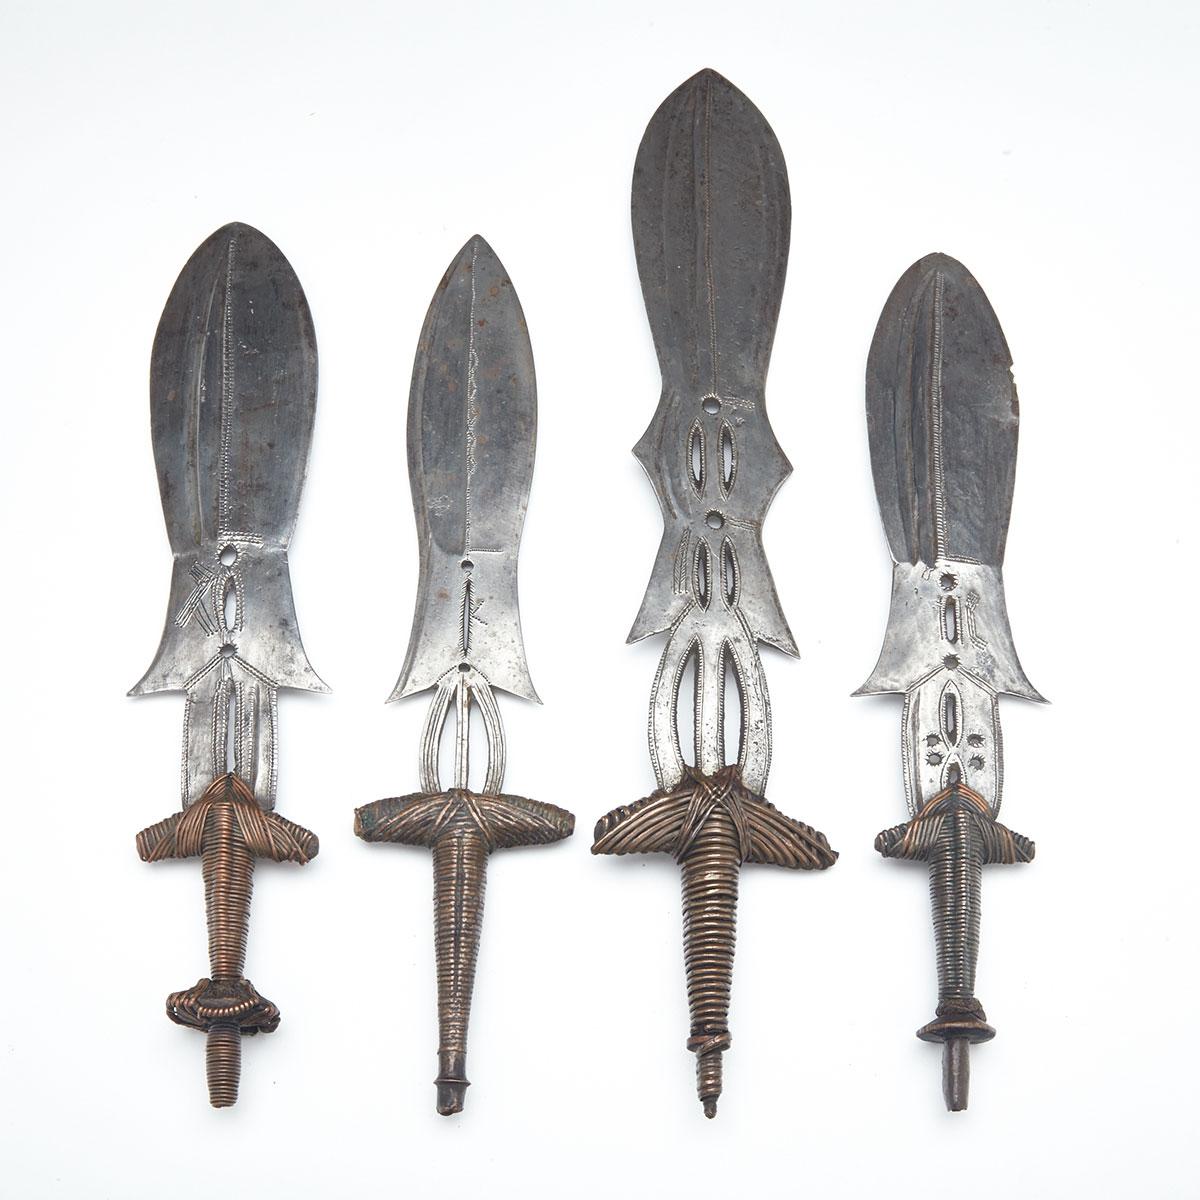 Four African Ngbandi Daggers, Zaire, 19th/20th century